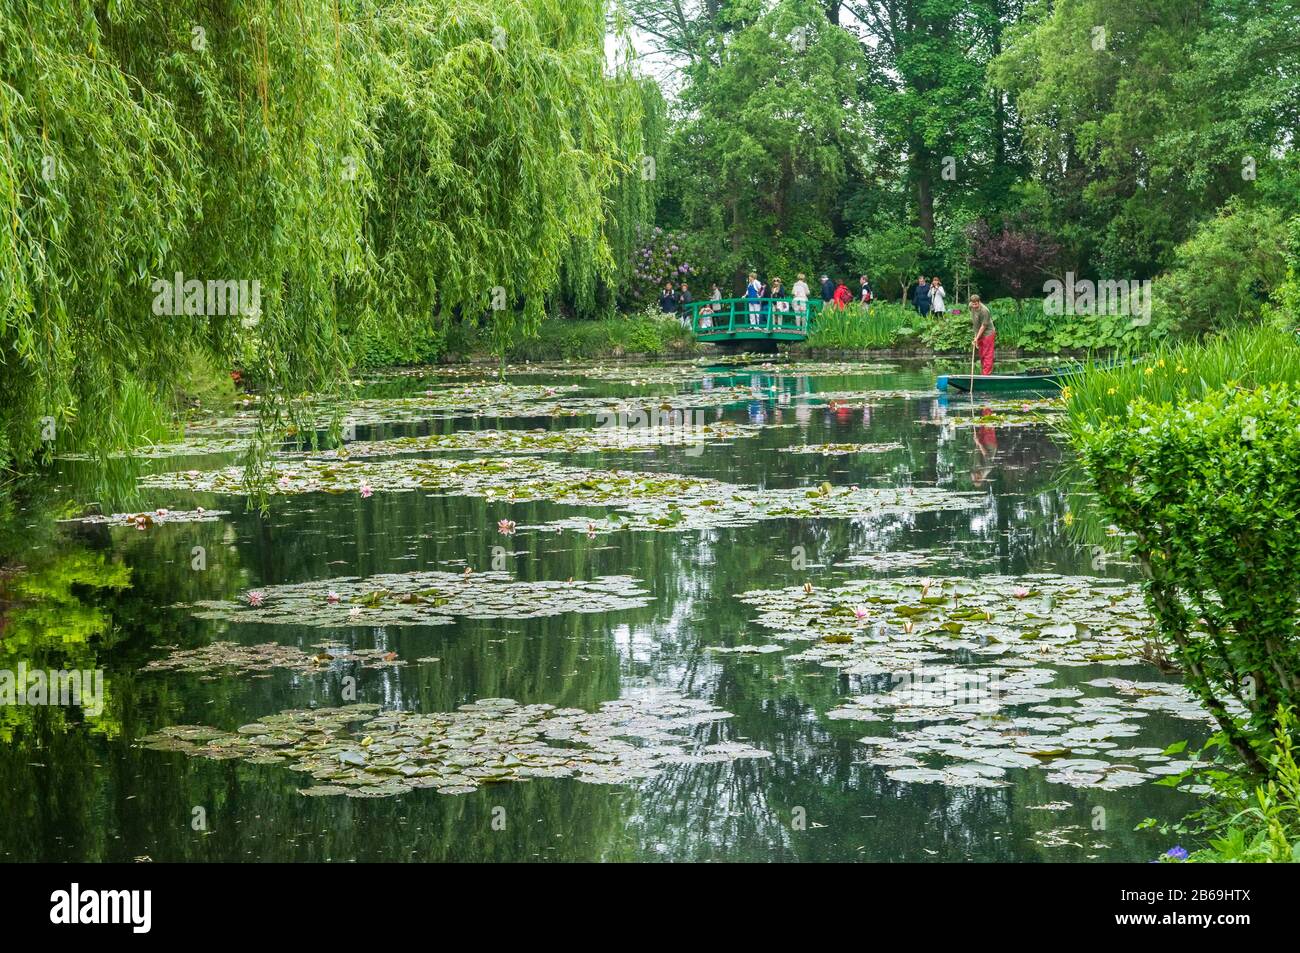 Claude Monet's house and garden in Giverny is both a work of art by the painter as well as an inspiration for his beautiful paintings. Stock Photo